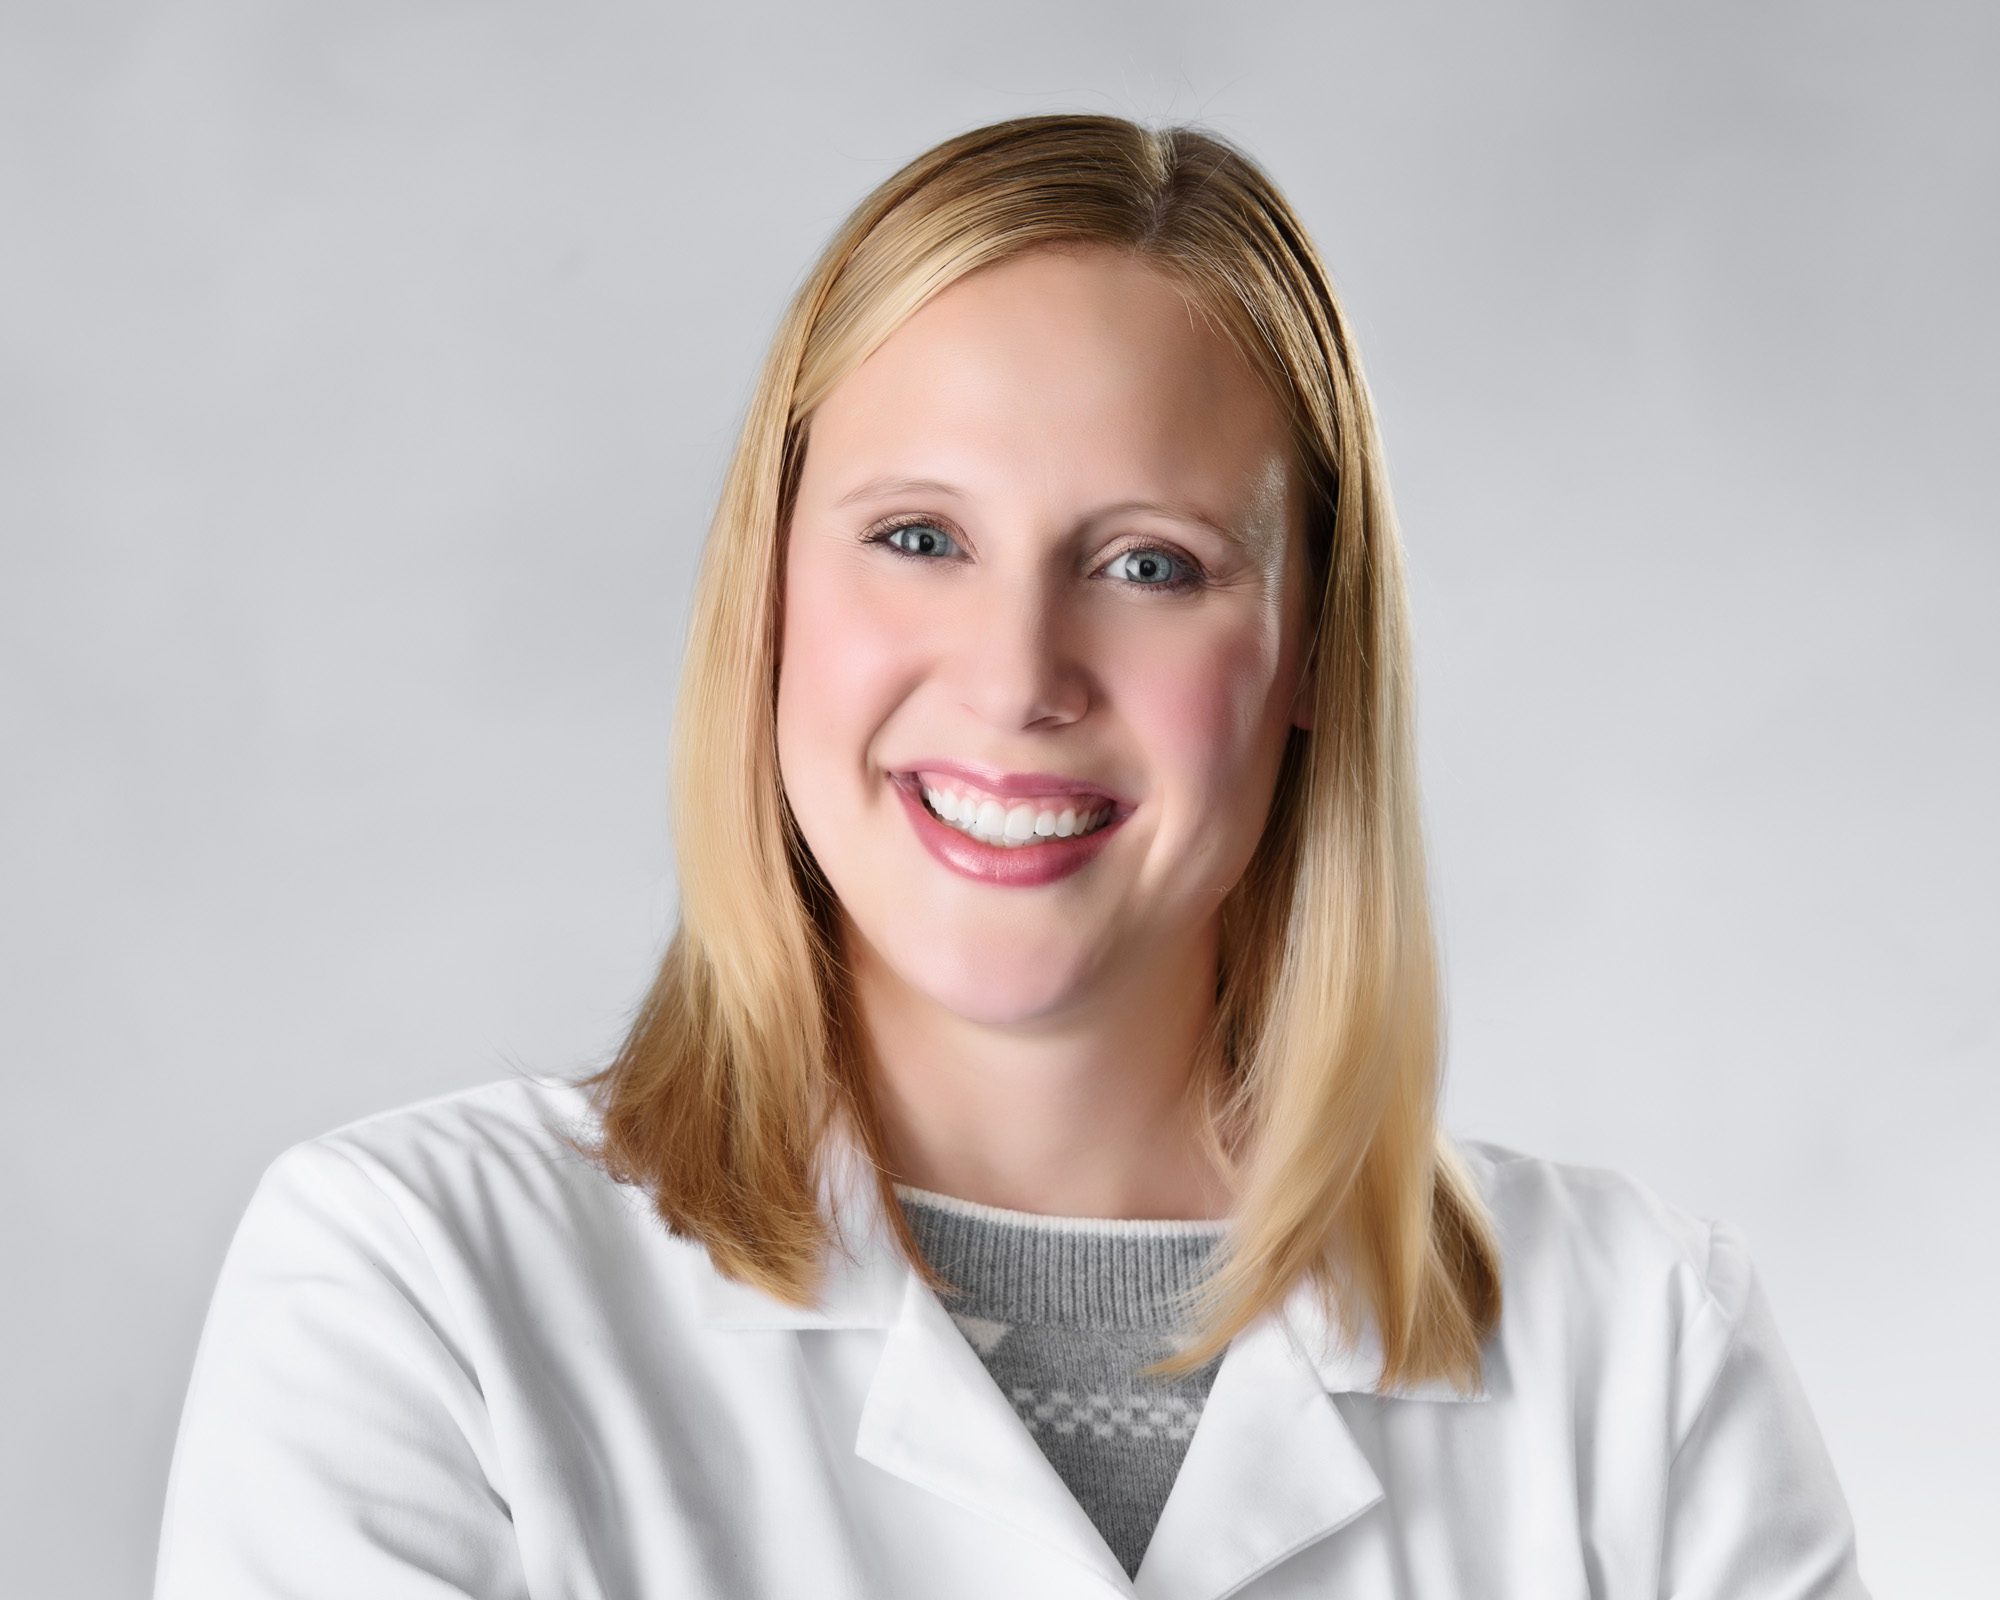 professional business portrait of female physician